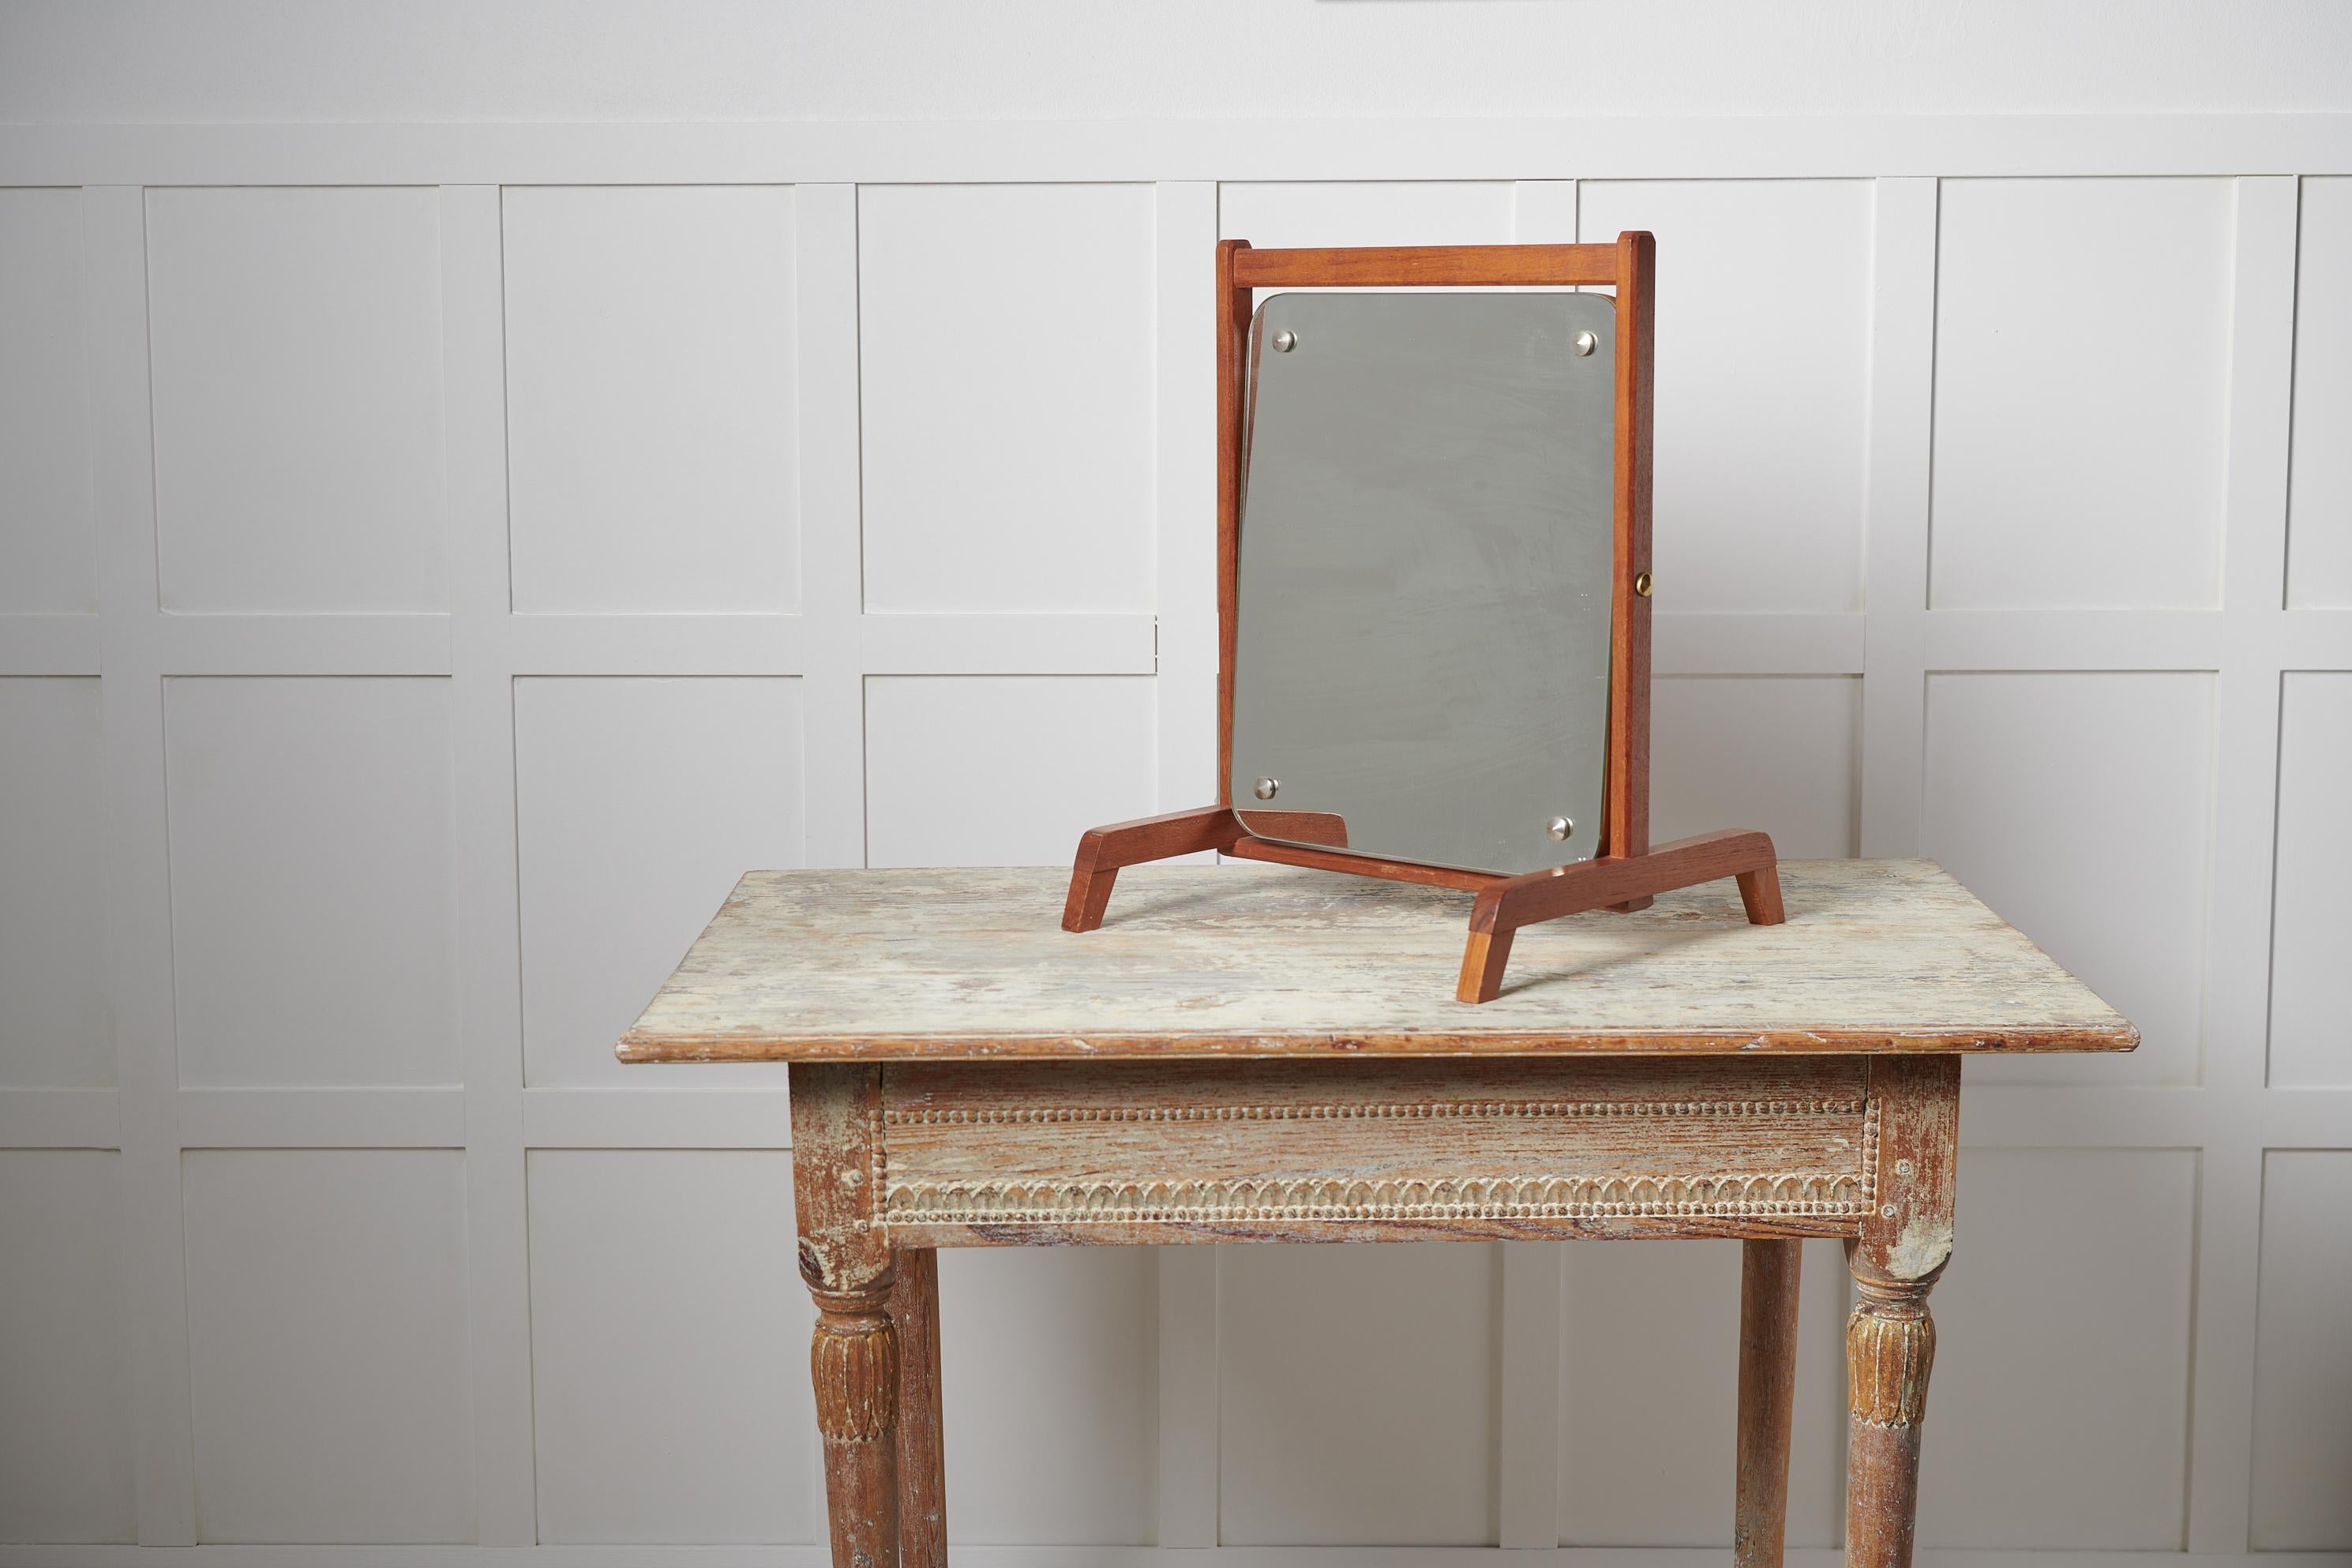 Vintage teak table mirror from Sweden. The mirror is made around the 1960s and is a timeless interior design item with plenty of retro charm. The frame is teak and the mirror measures 35 cm deep including the legs.